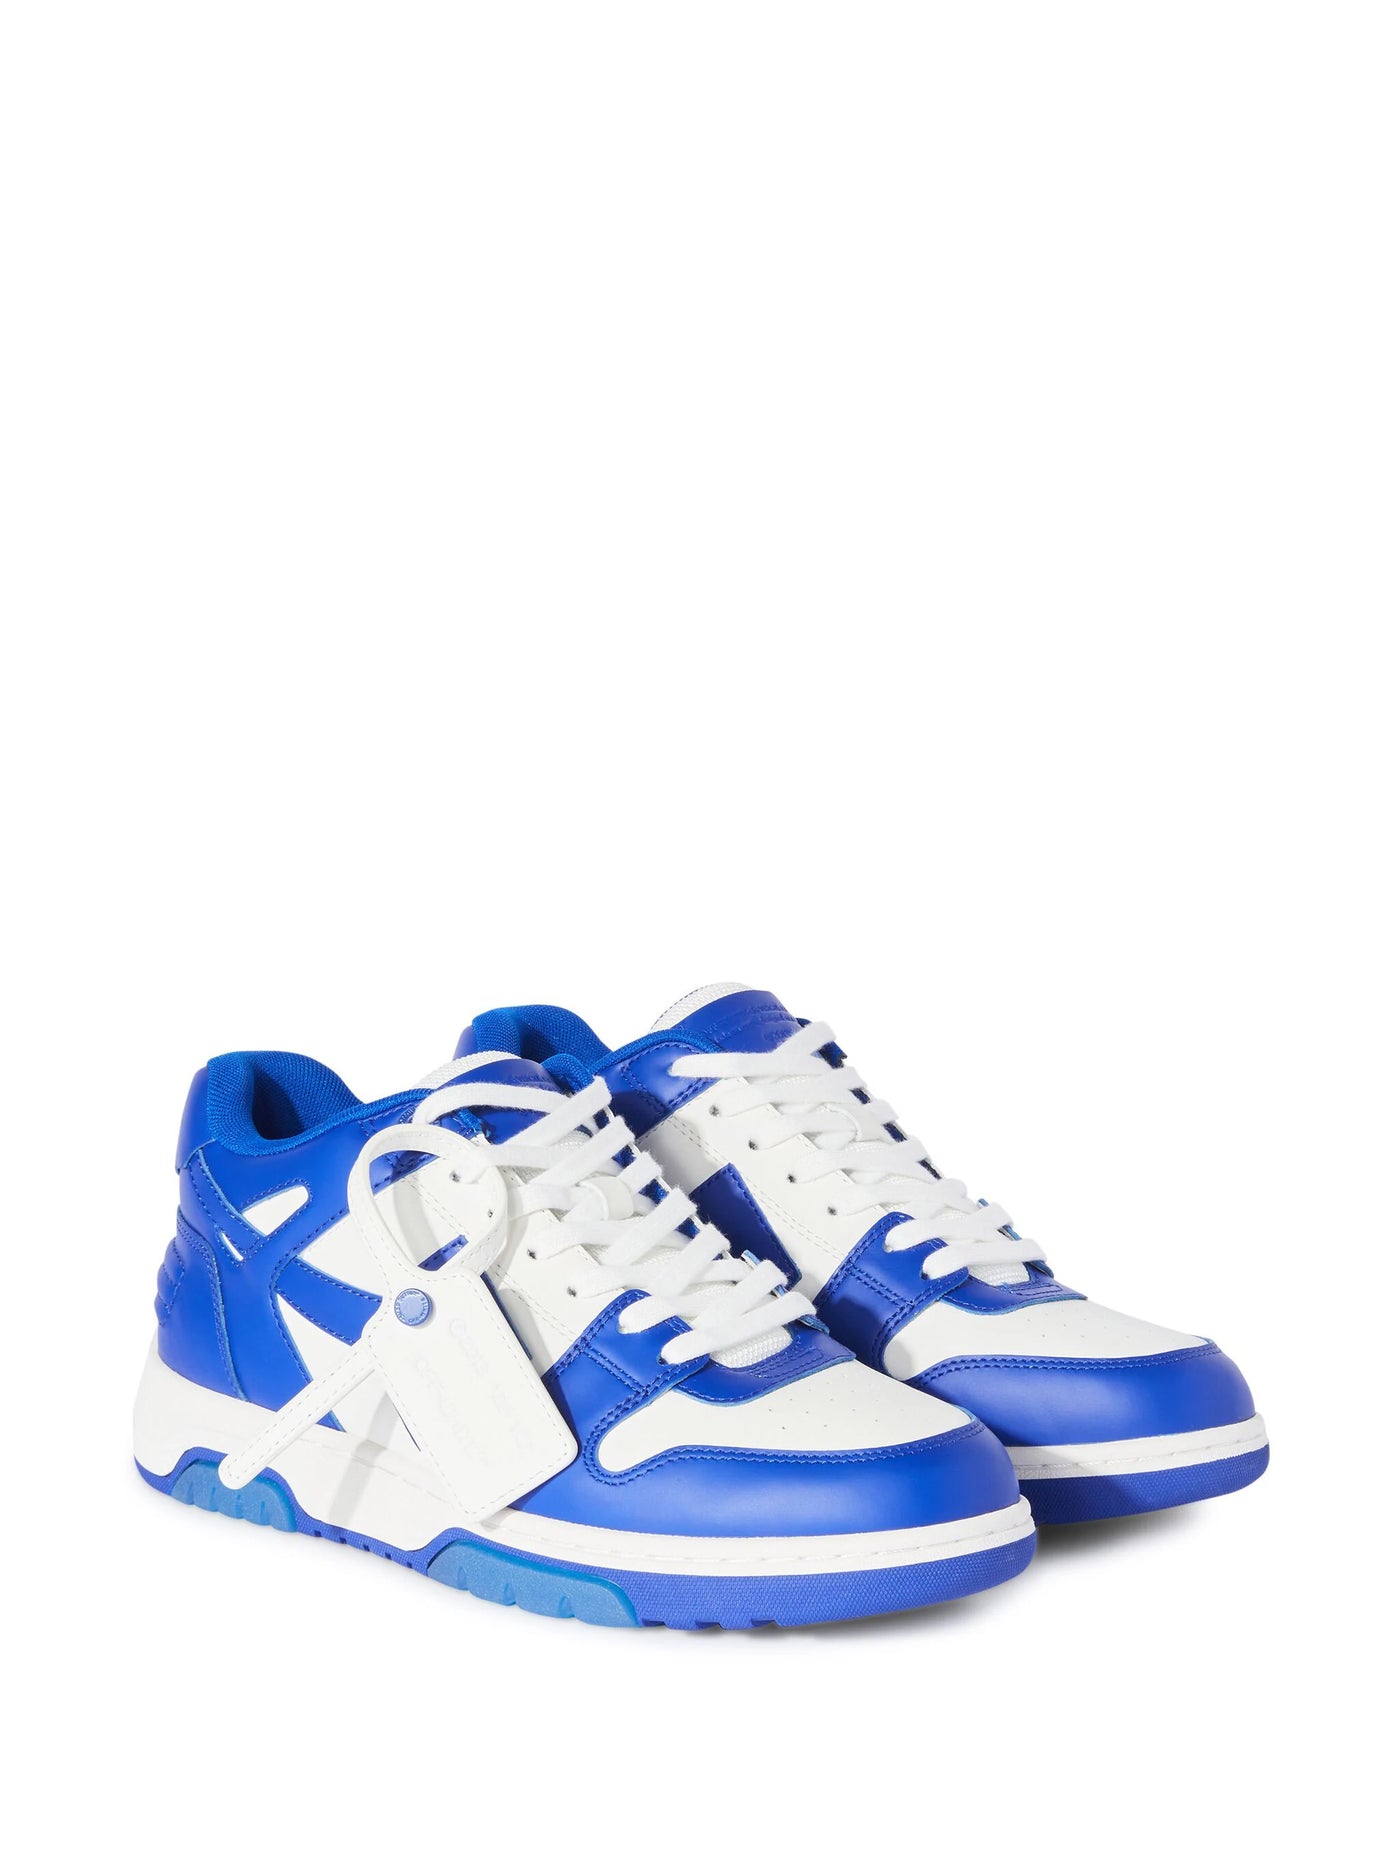 Off-White Out of Office Calf Leather Trainers in White/Blue